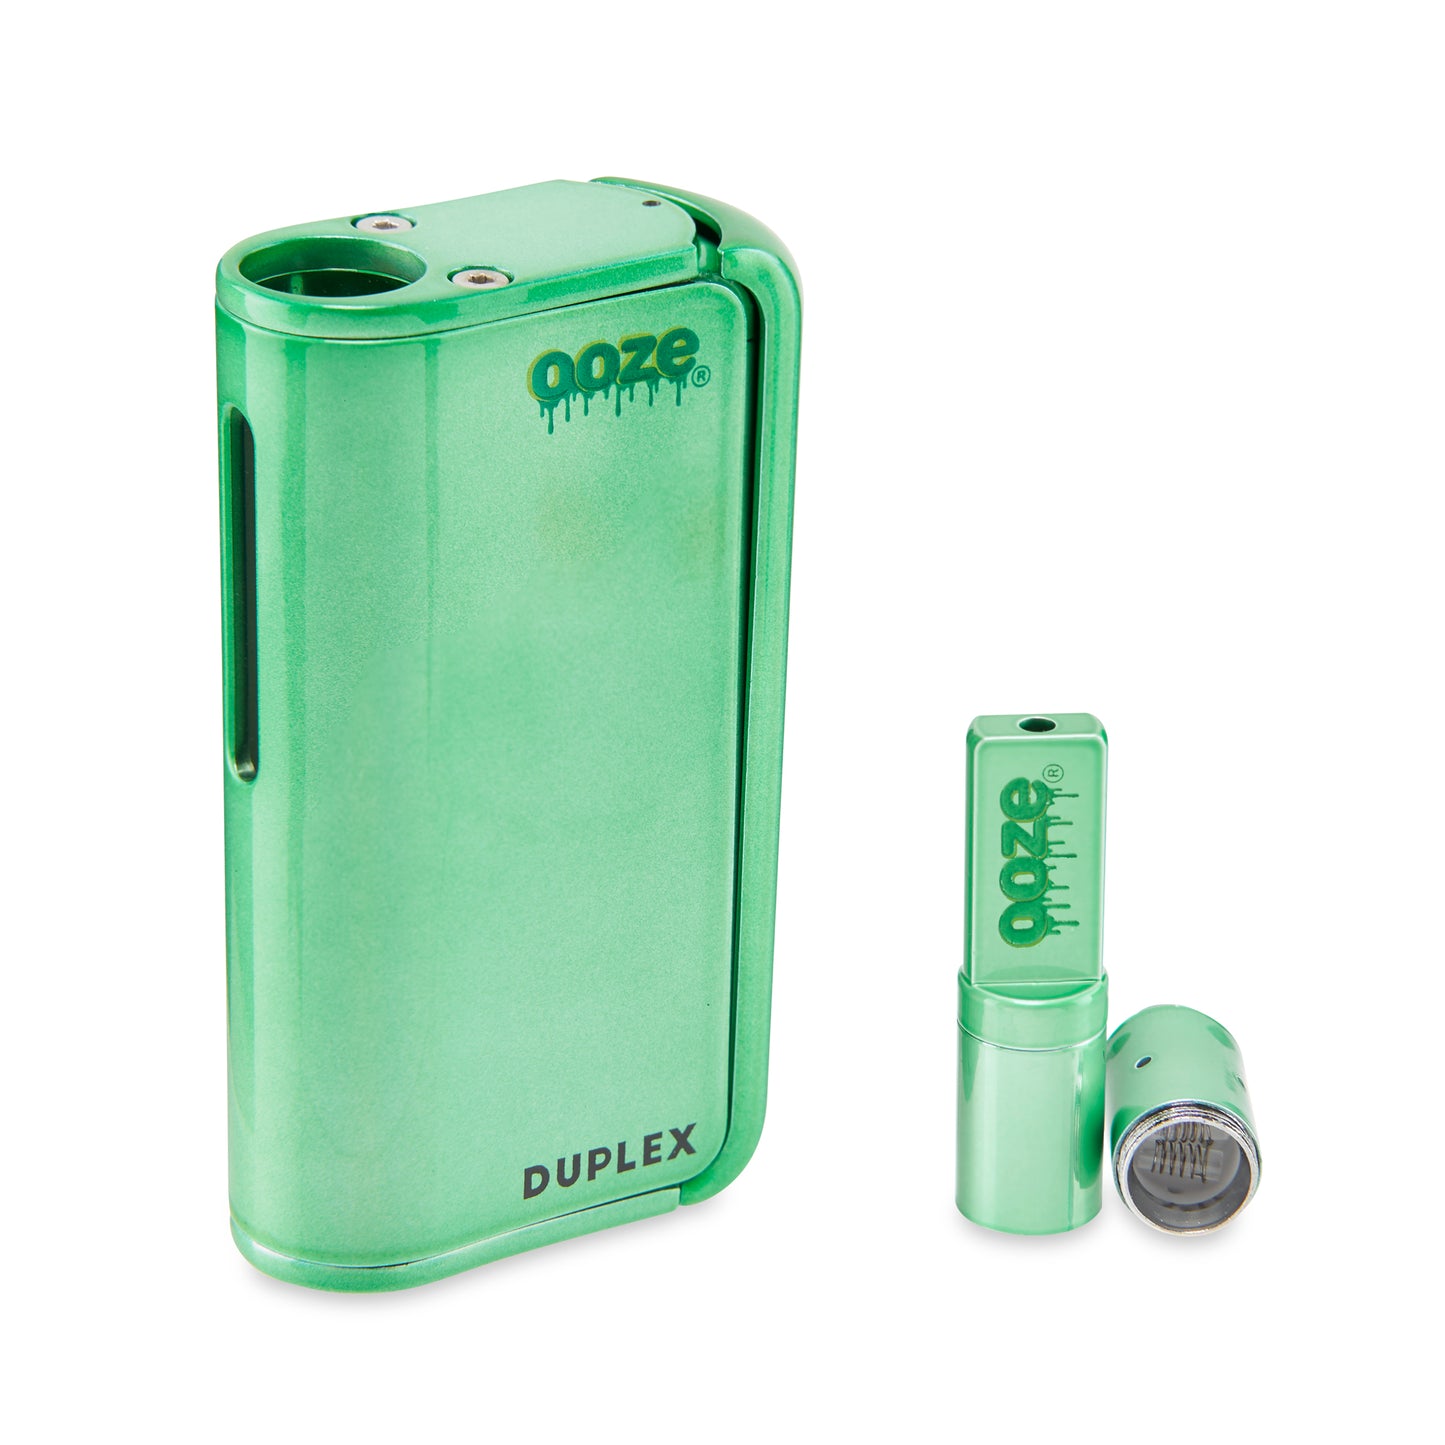 The Mary Jade Ooze Duplex Pro Vaporizer is shown on an angle with the wax atomizer to the right, unscrewed to show the dual quartz coil.